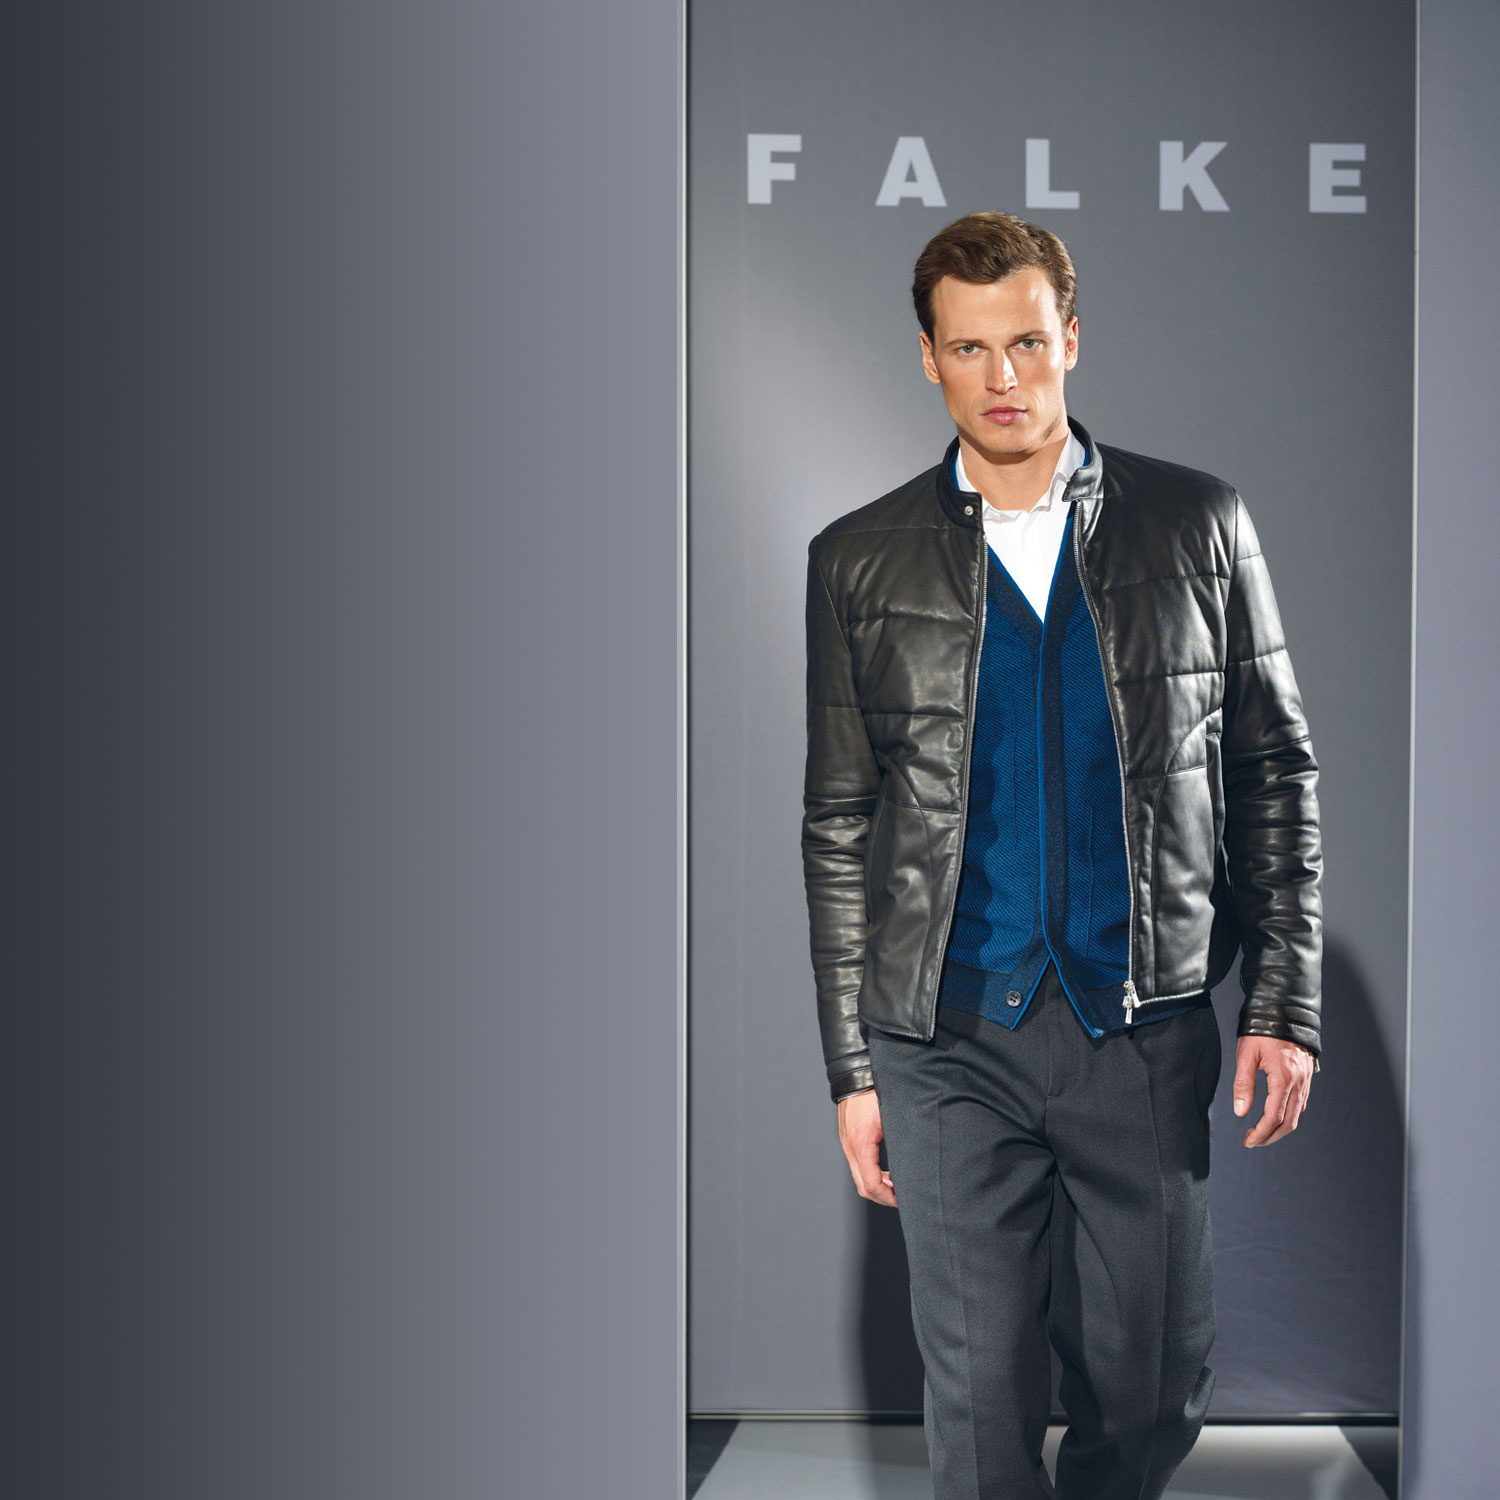 FALKE F/W collection for men 2012